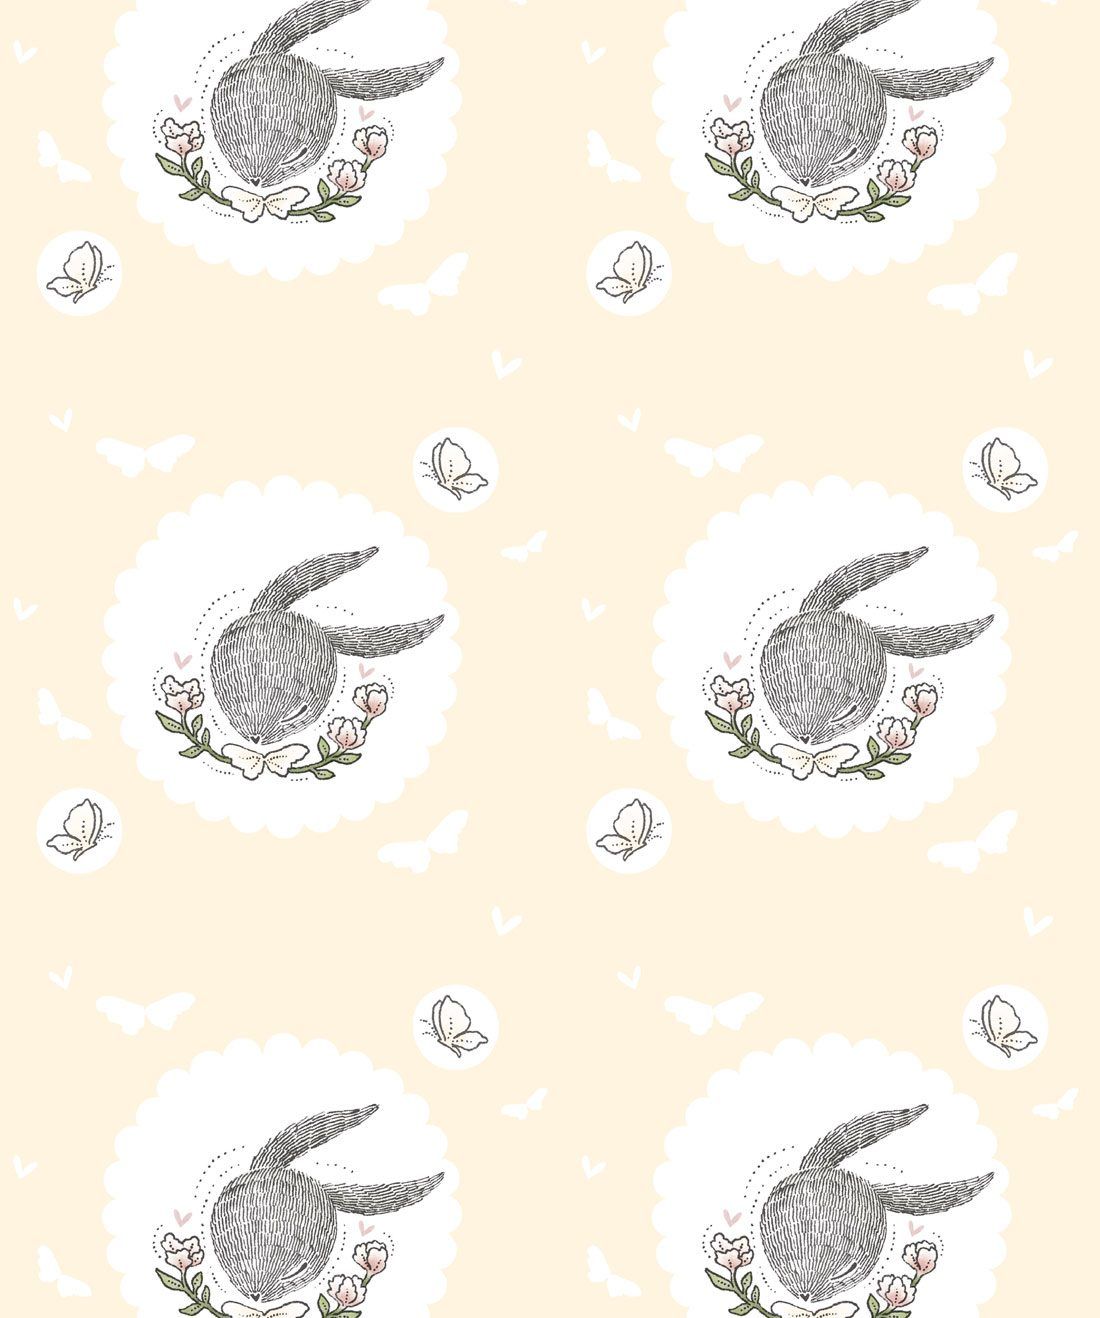 Rabbit & Butterfly is a cute illustrated Wallpaper